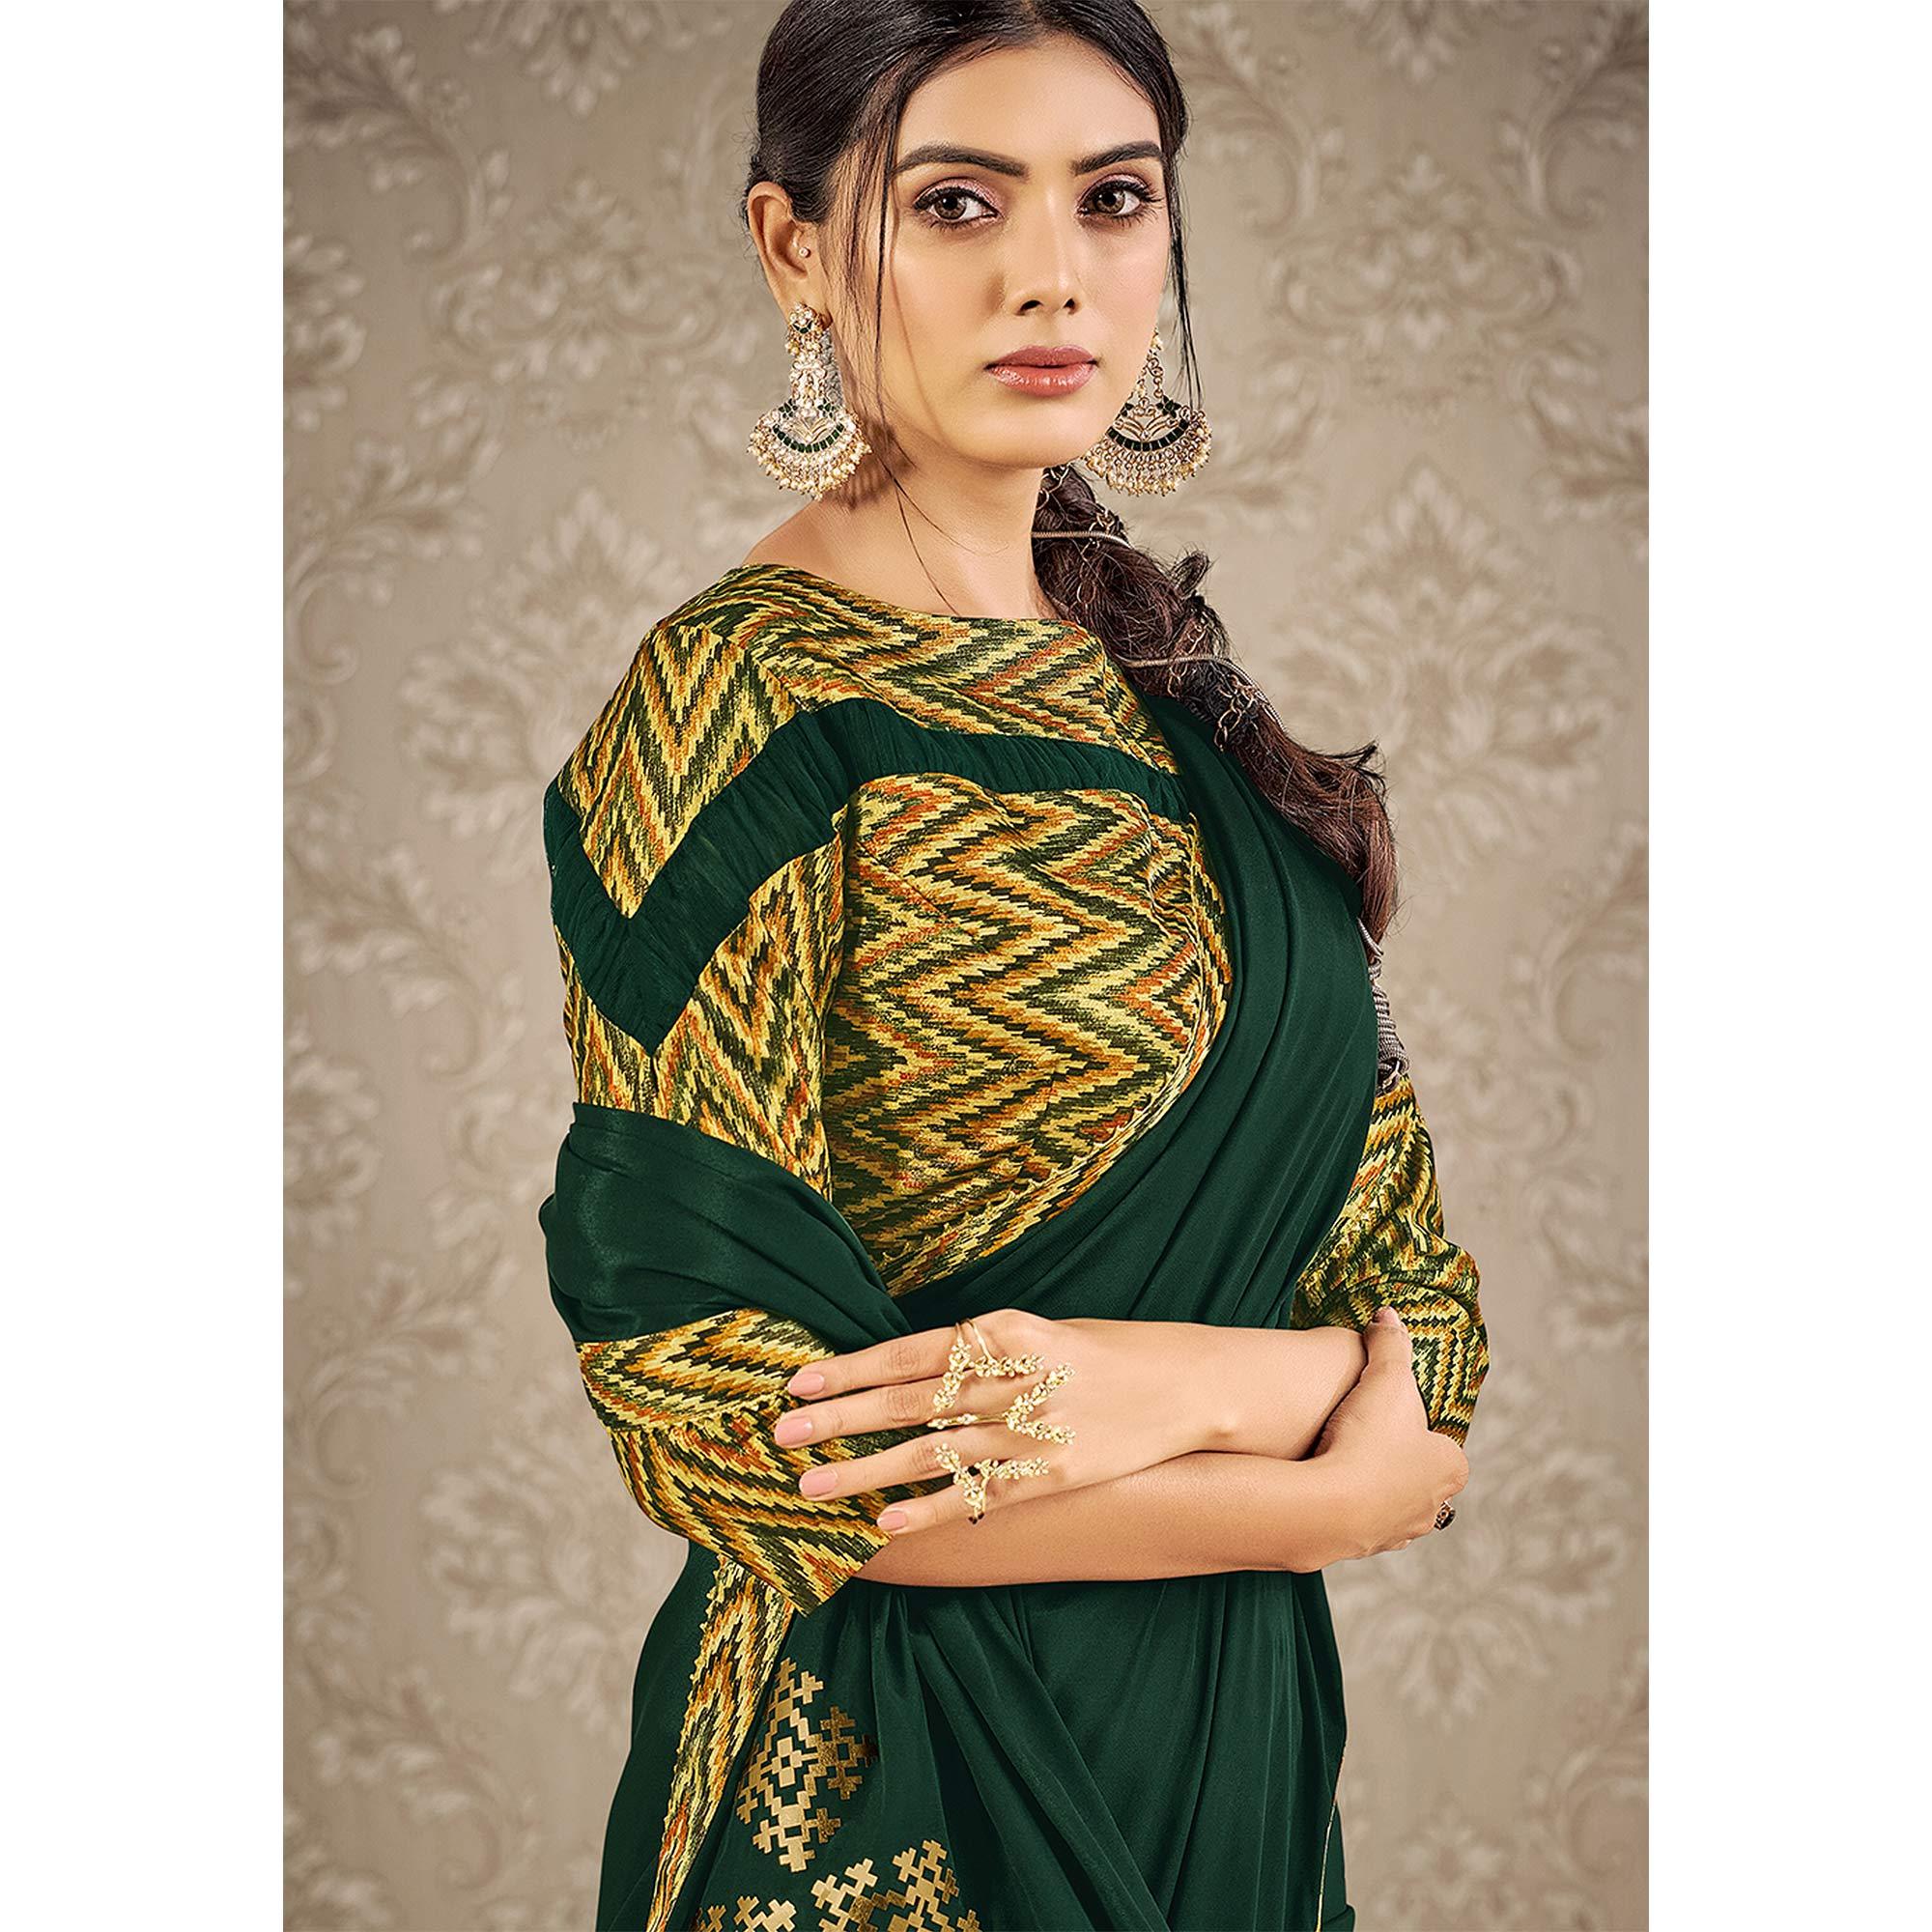 Green Partywear Appliqued With Digital Printed Satin Saree - Peachmode